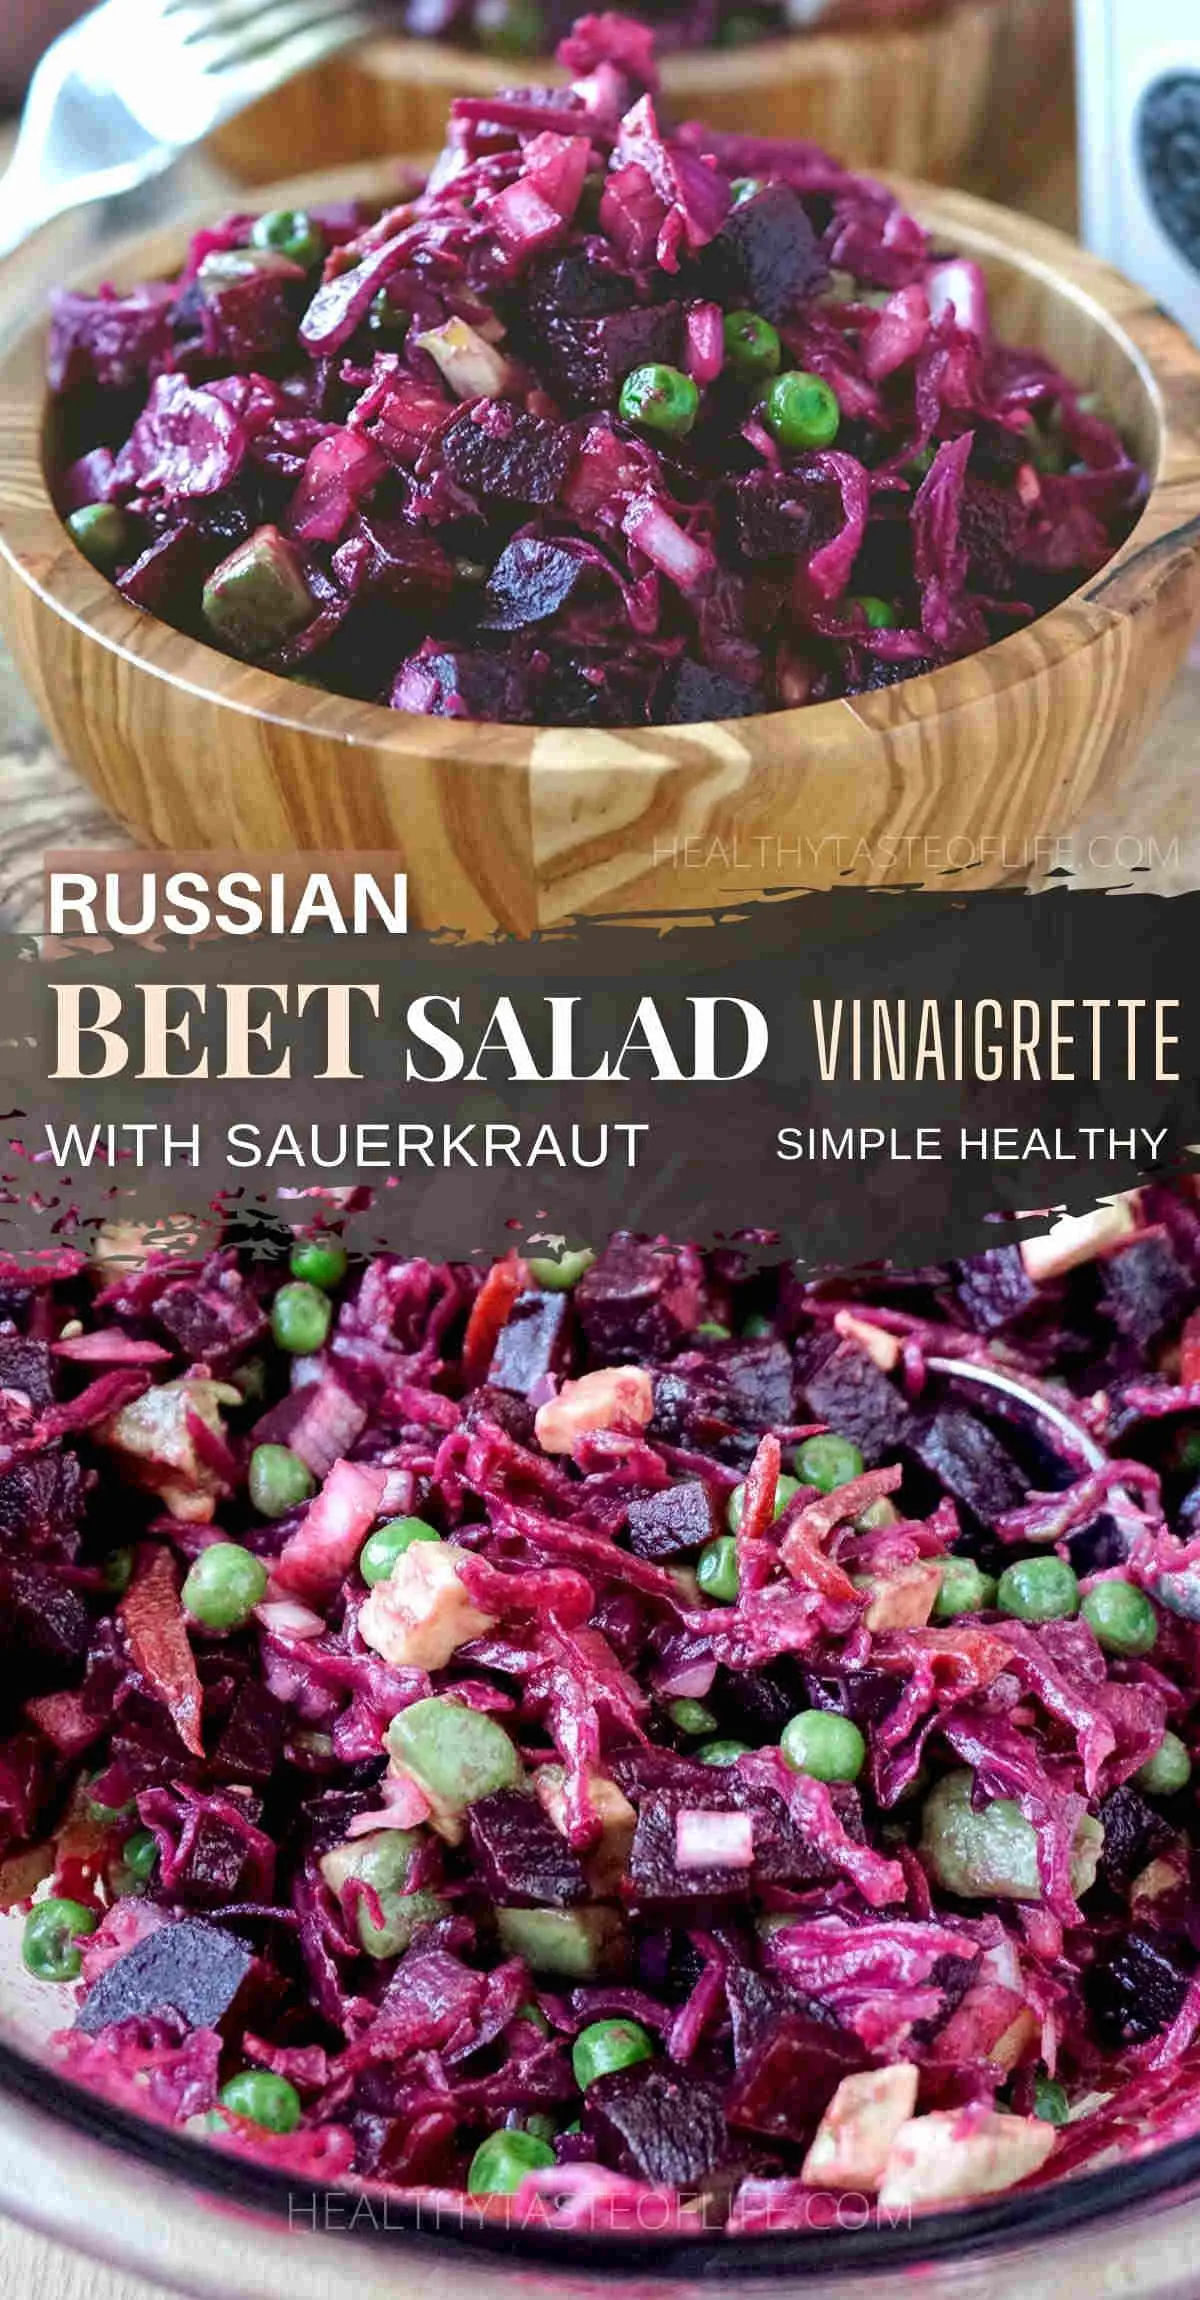 Similar to a Russian vinaigrette salad (Винегрет), this simple salad russe is made with cooked beets, sauerkraut and peas although I made a few adjustments. It’s an easy version of Russian salad with beets also called Russian vinaigrette typically served during the winter time holidays. This Russian salad with beets is perfect if you're looking for a lighter version of beet salad without mayo. #russiansalad #vinaigrettesalad #russianbeetsalad #saladrusse #sauerkrautsalad #russianvinaigrette